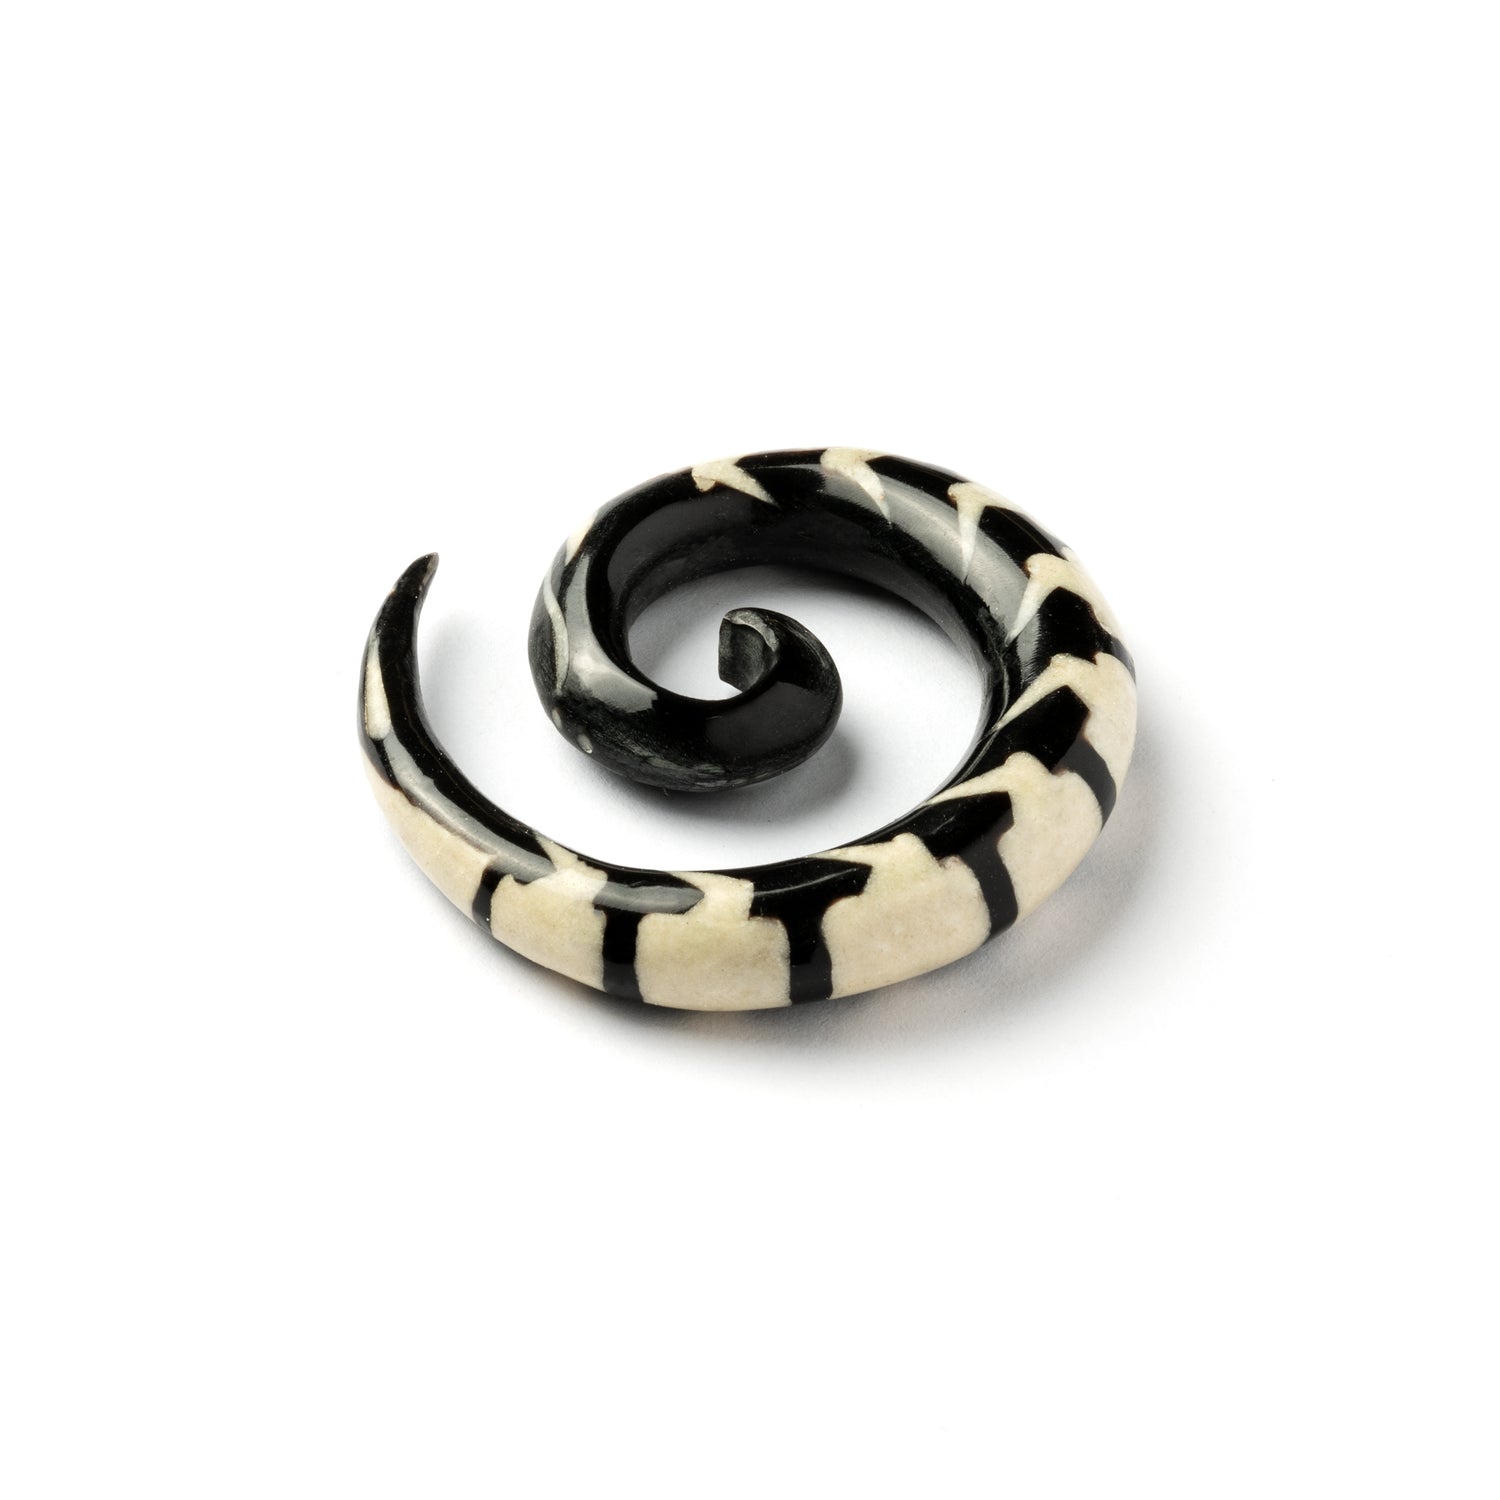 single spiral horn ear stretchers centipede shaped with bone inlay back view